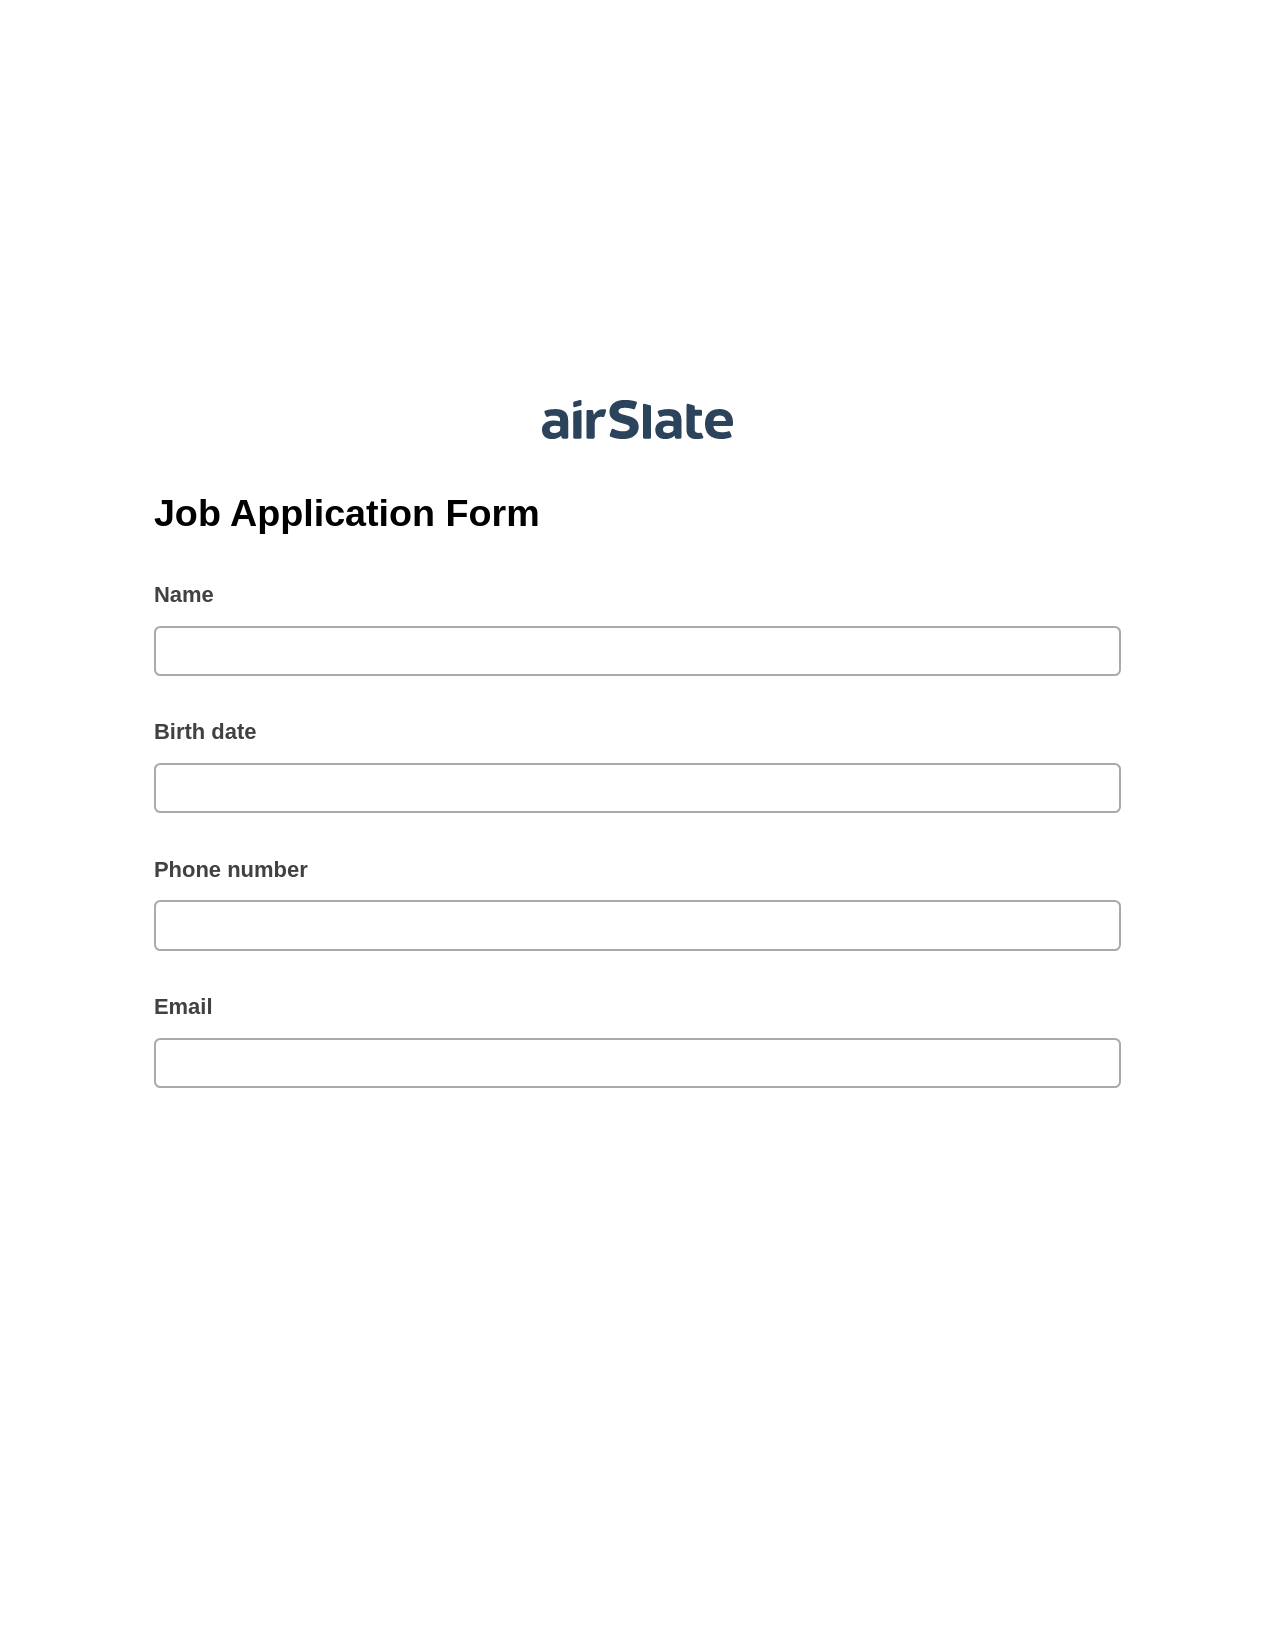 Multirole Job Application Form Pre-fill from Smartsheet Bot, Send a Slate with Roles Bot, Google Drive Bot